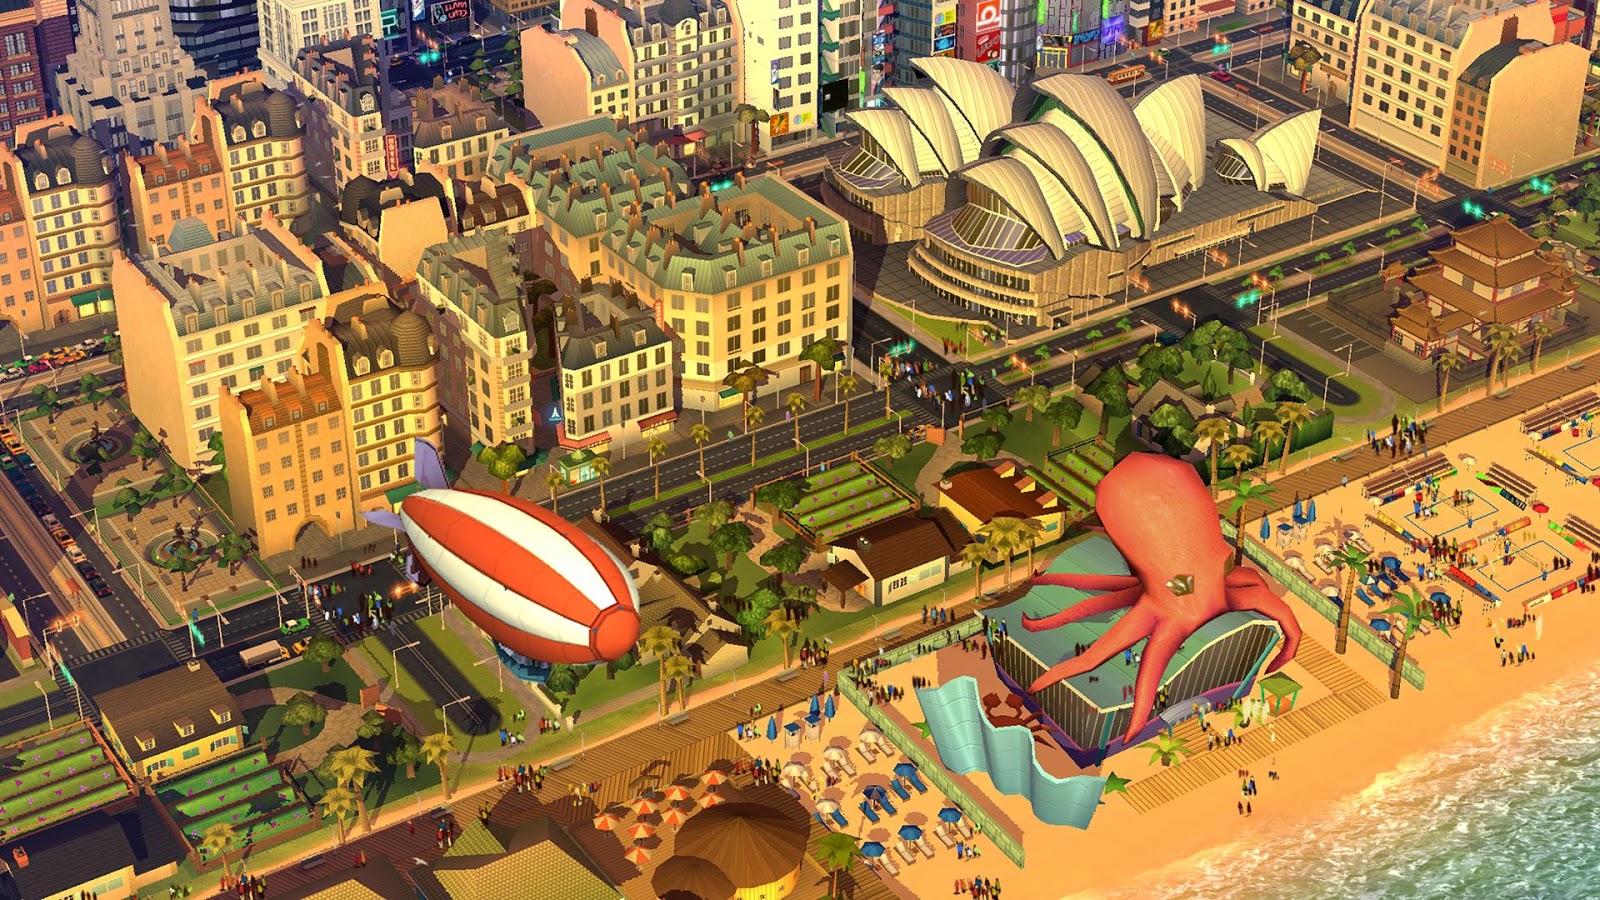 Ooh, tentacles! I might have to download Sim City BuildIt on my phone...